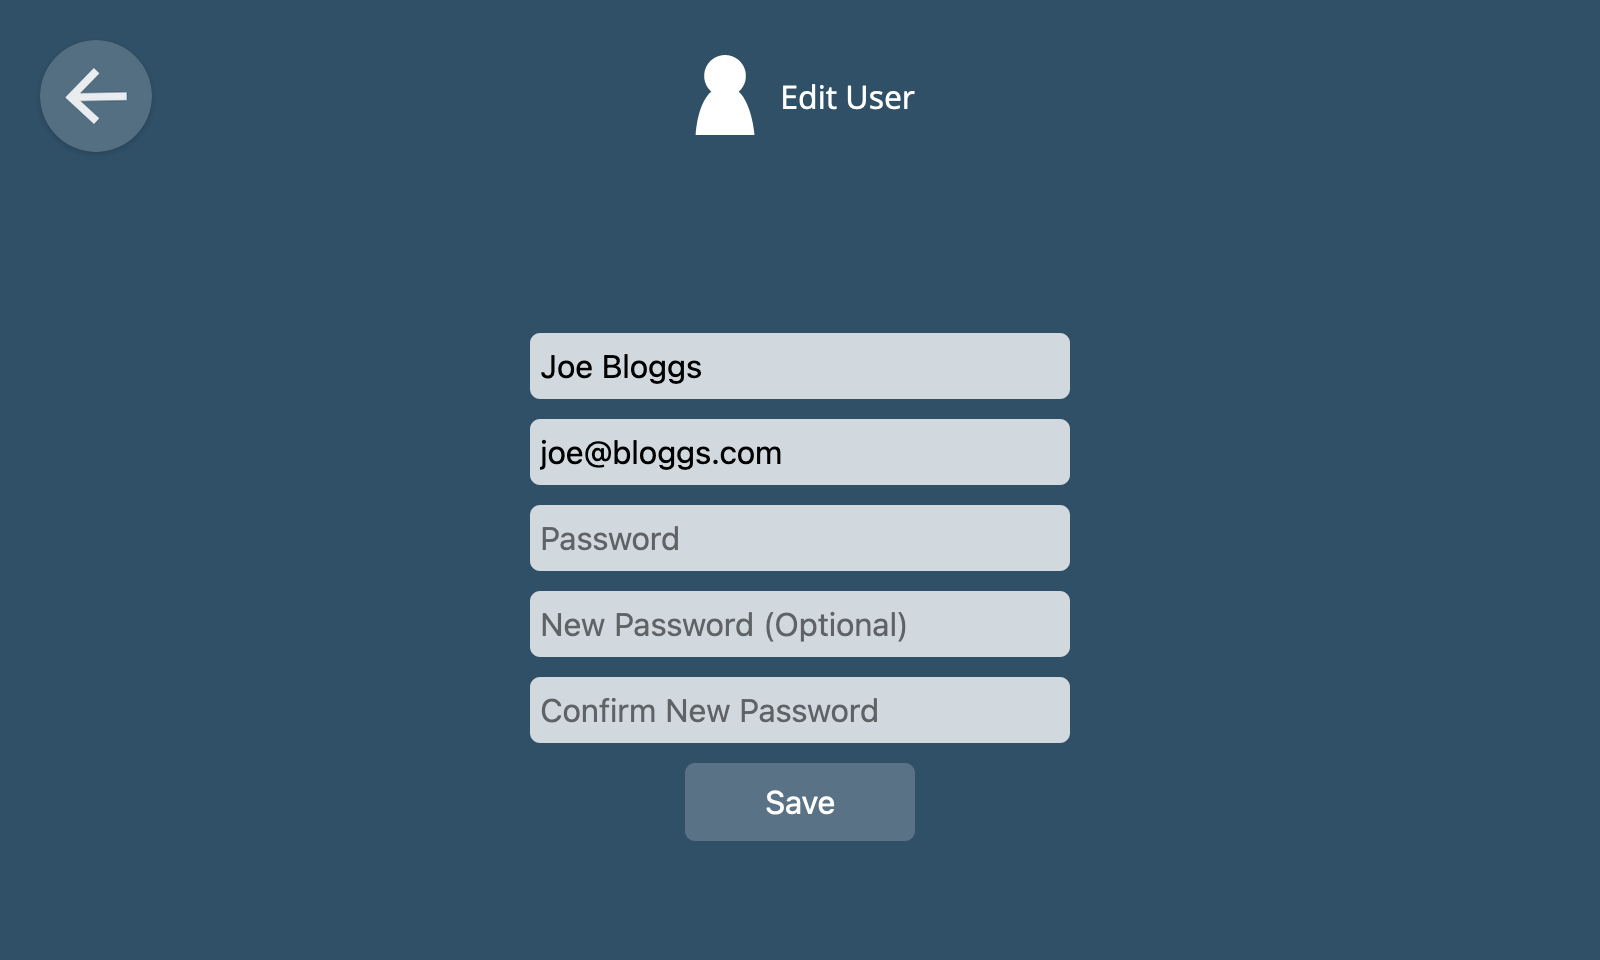 Screenshot of the edit user screen, with a form to edit the name, email and password of the user